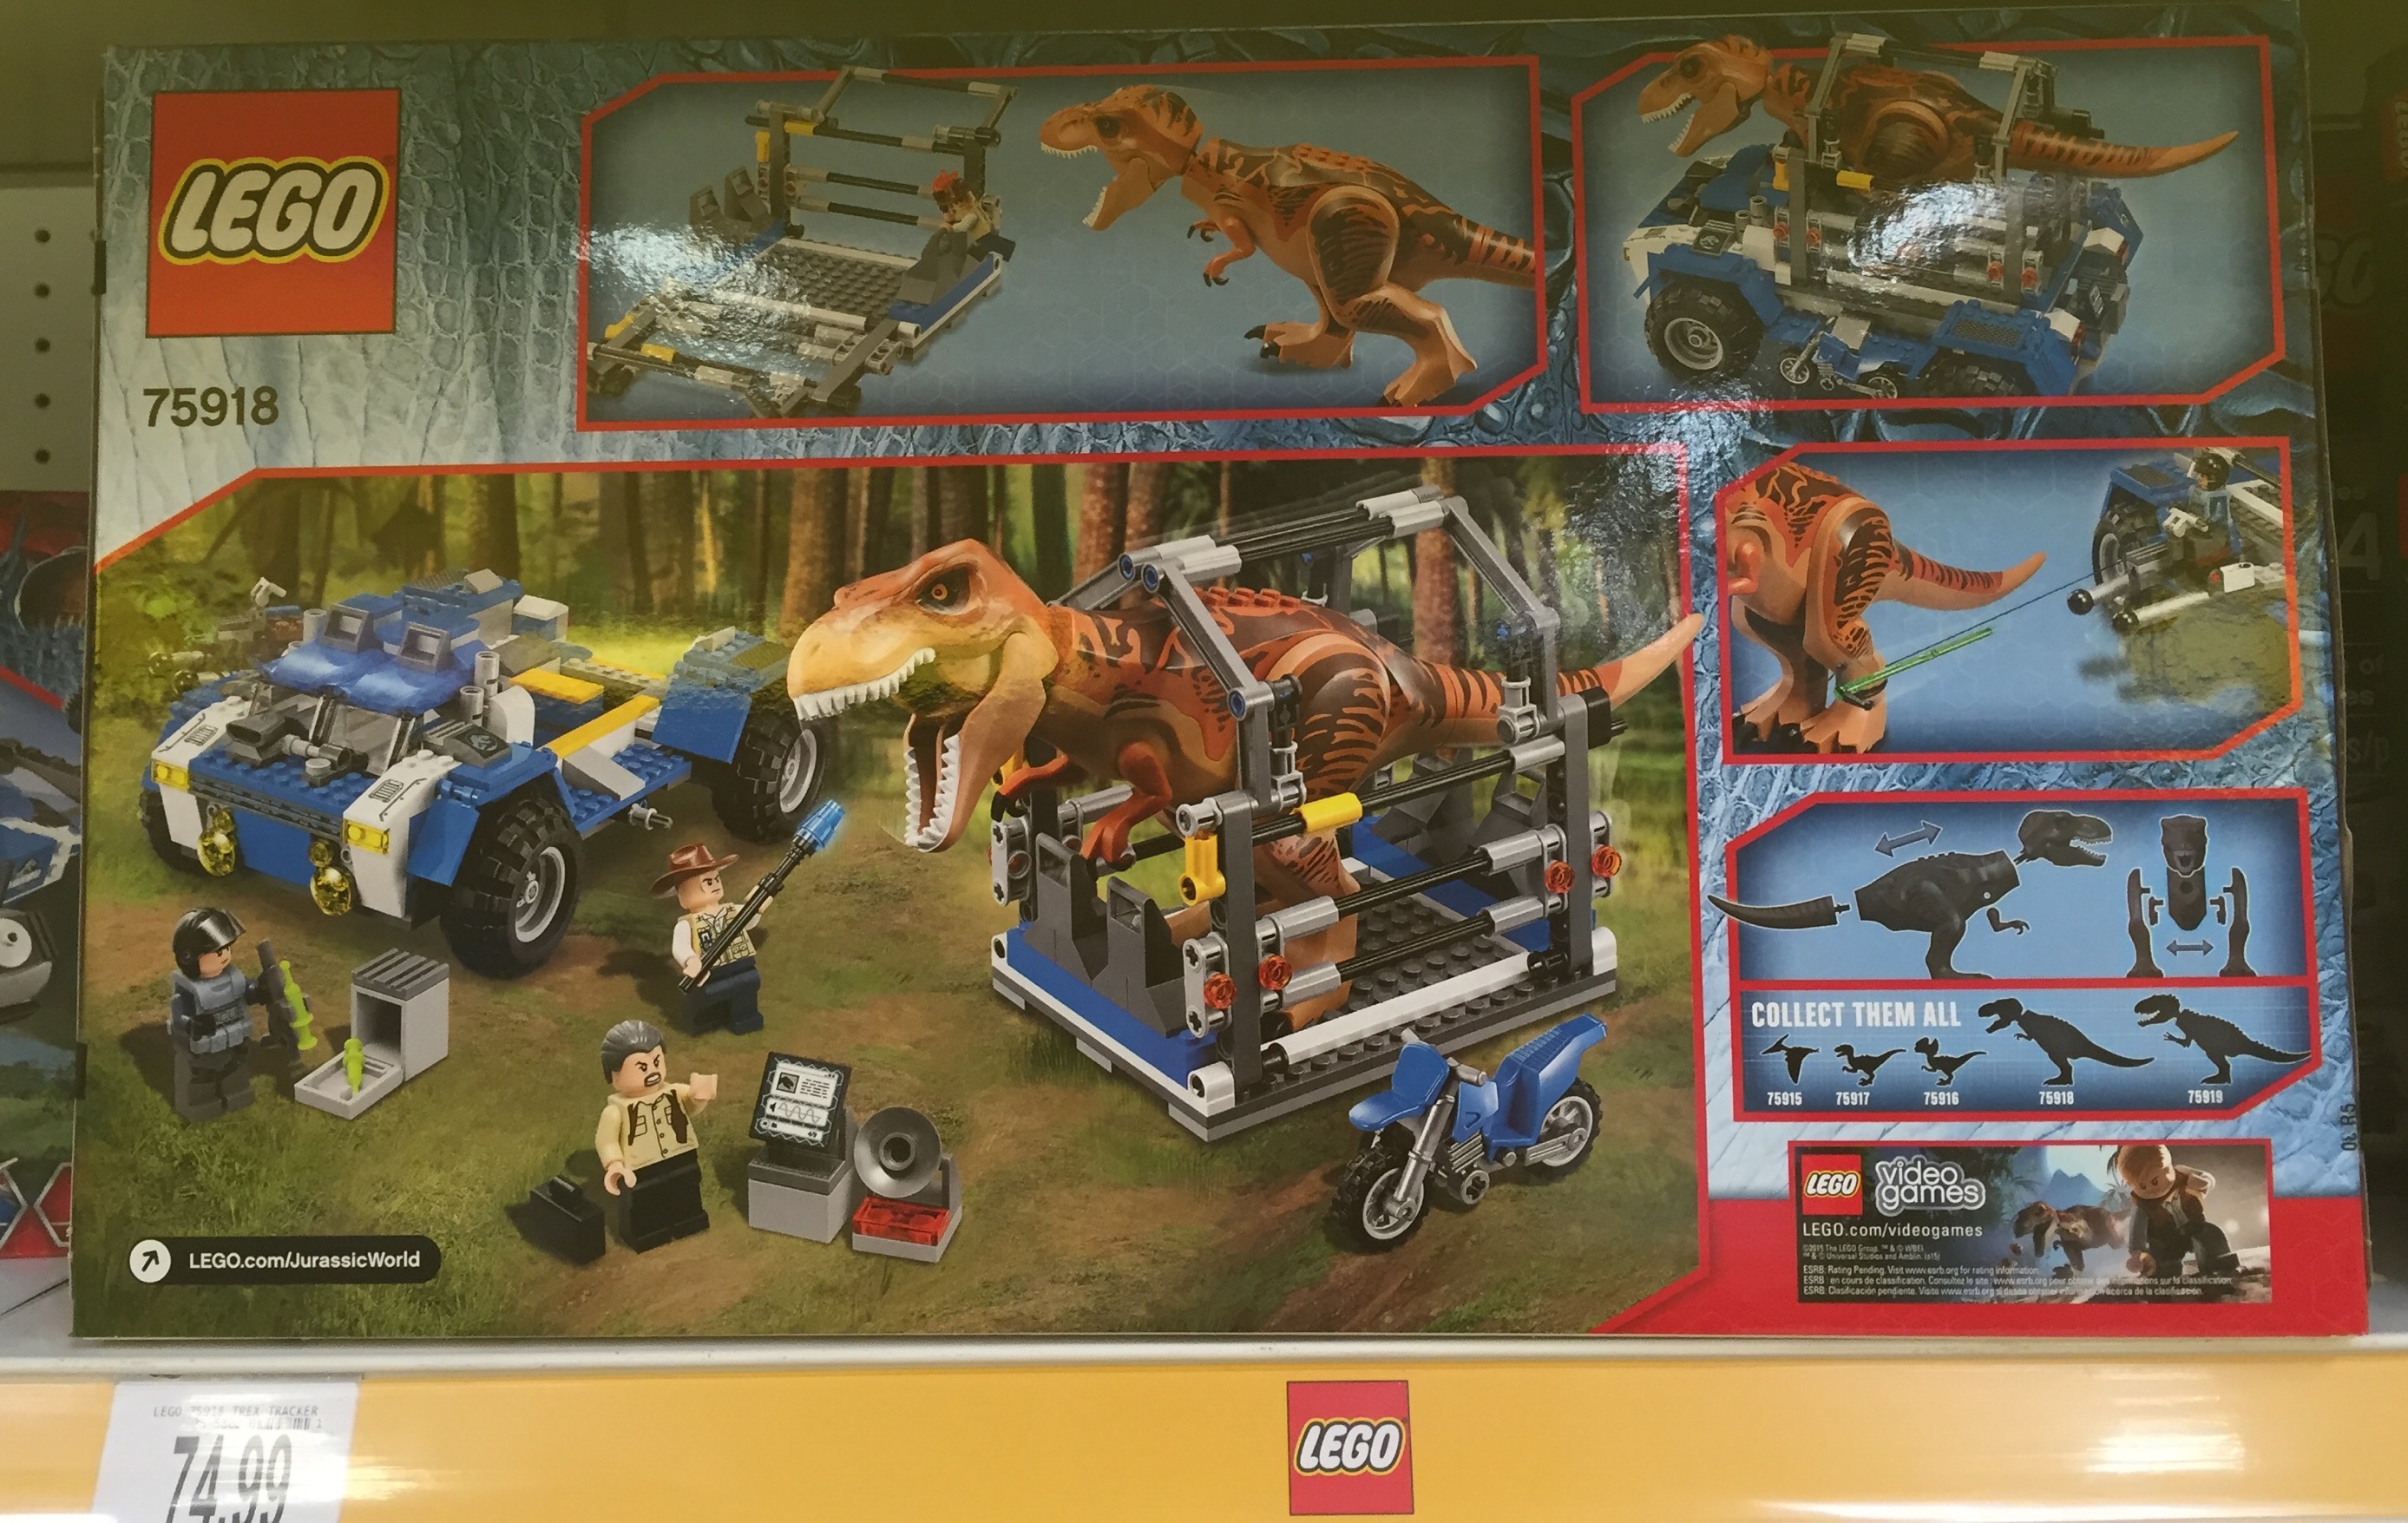 Lego Jurassic World Sets Released Online And In Stores